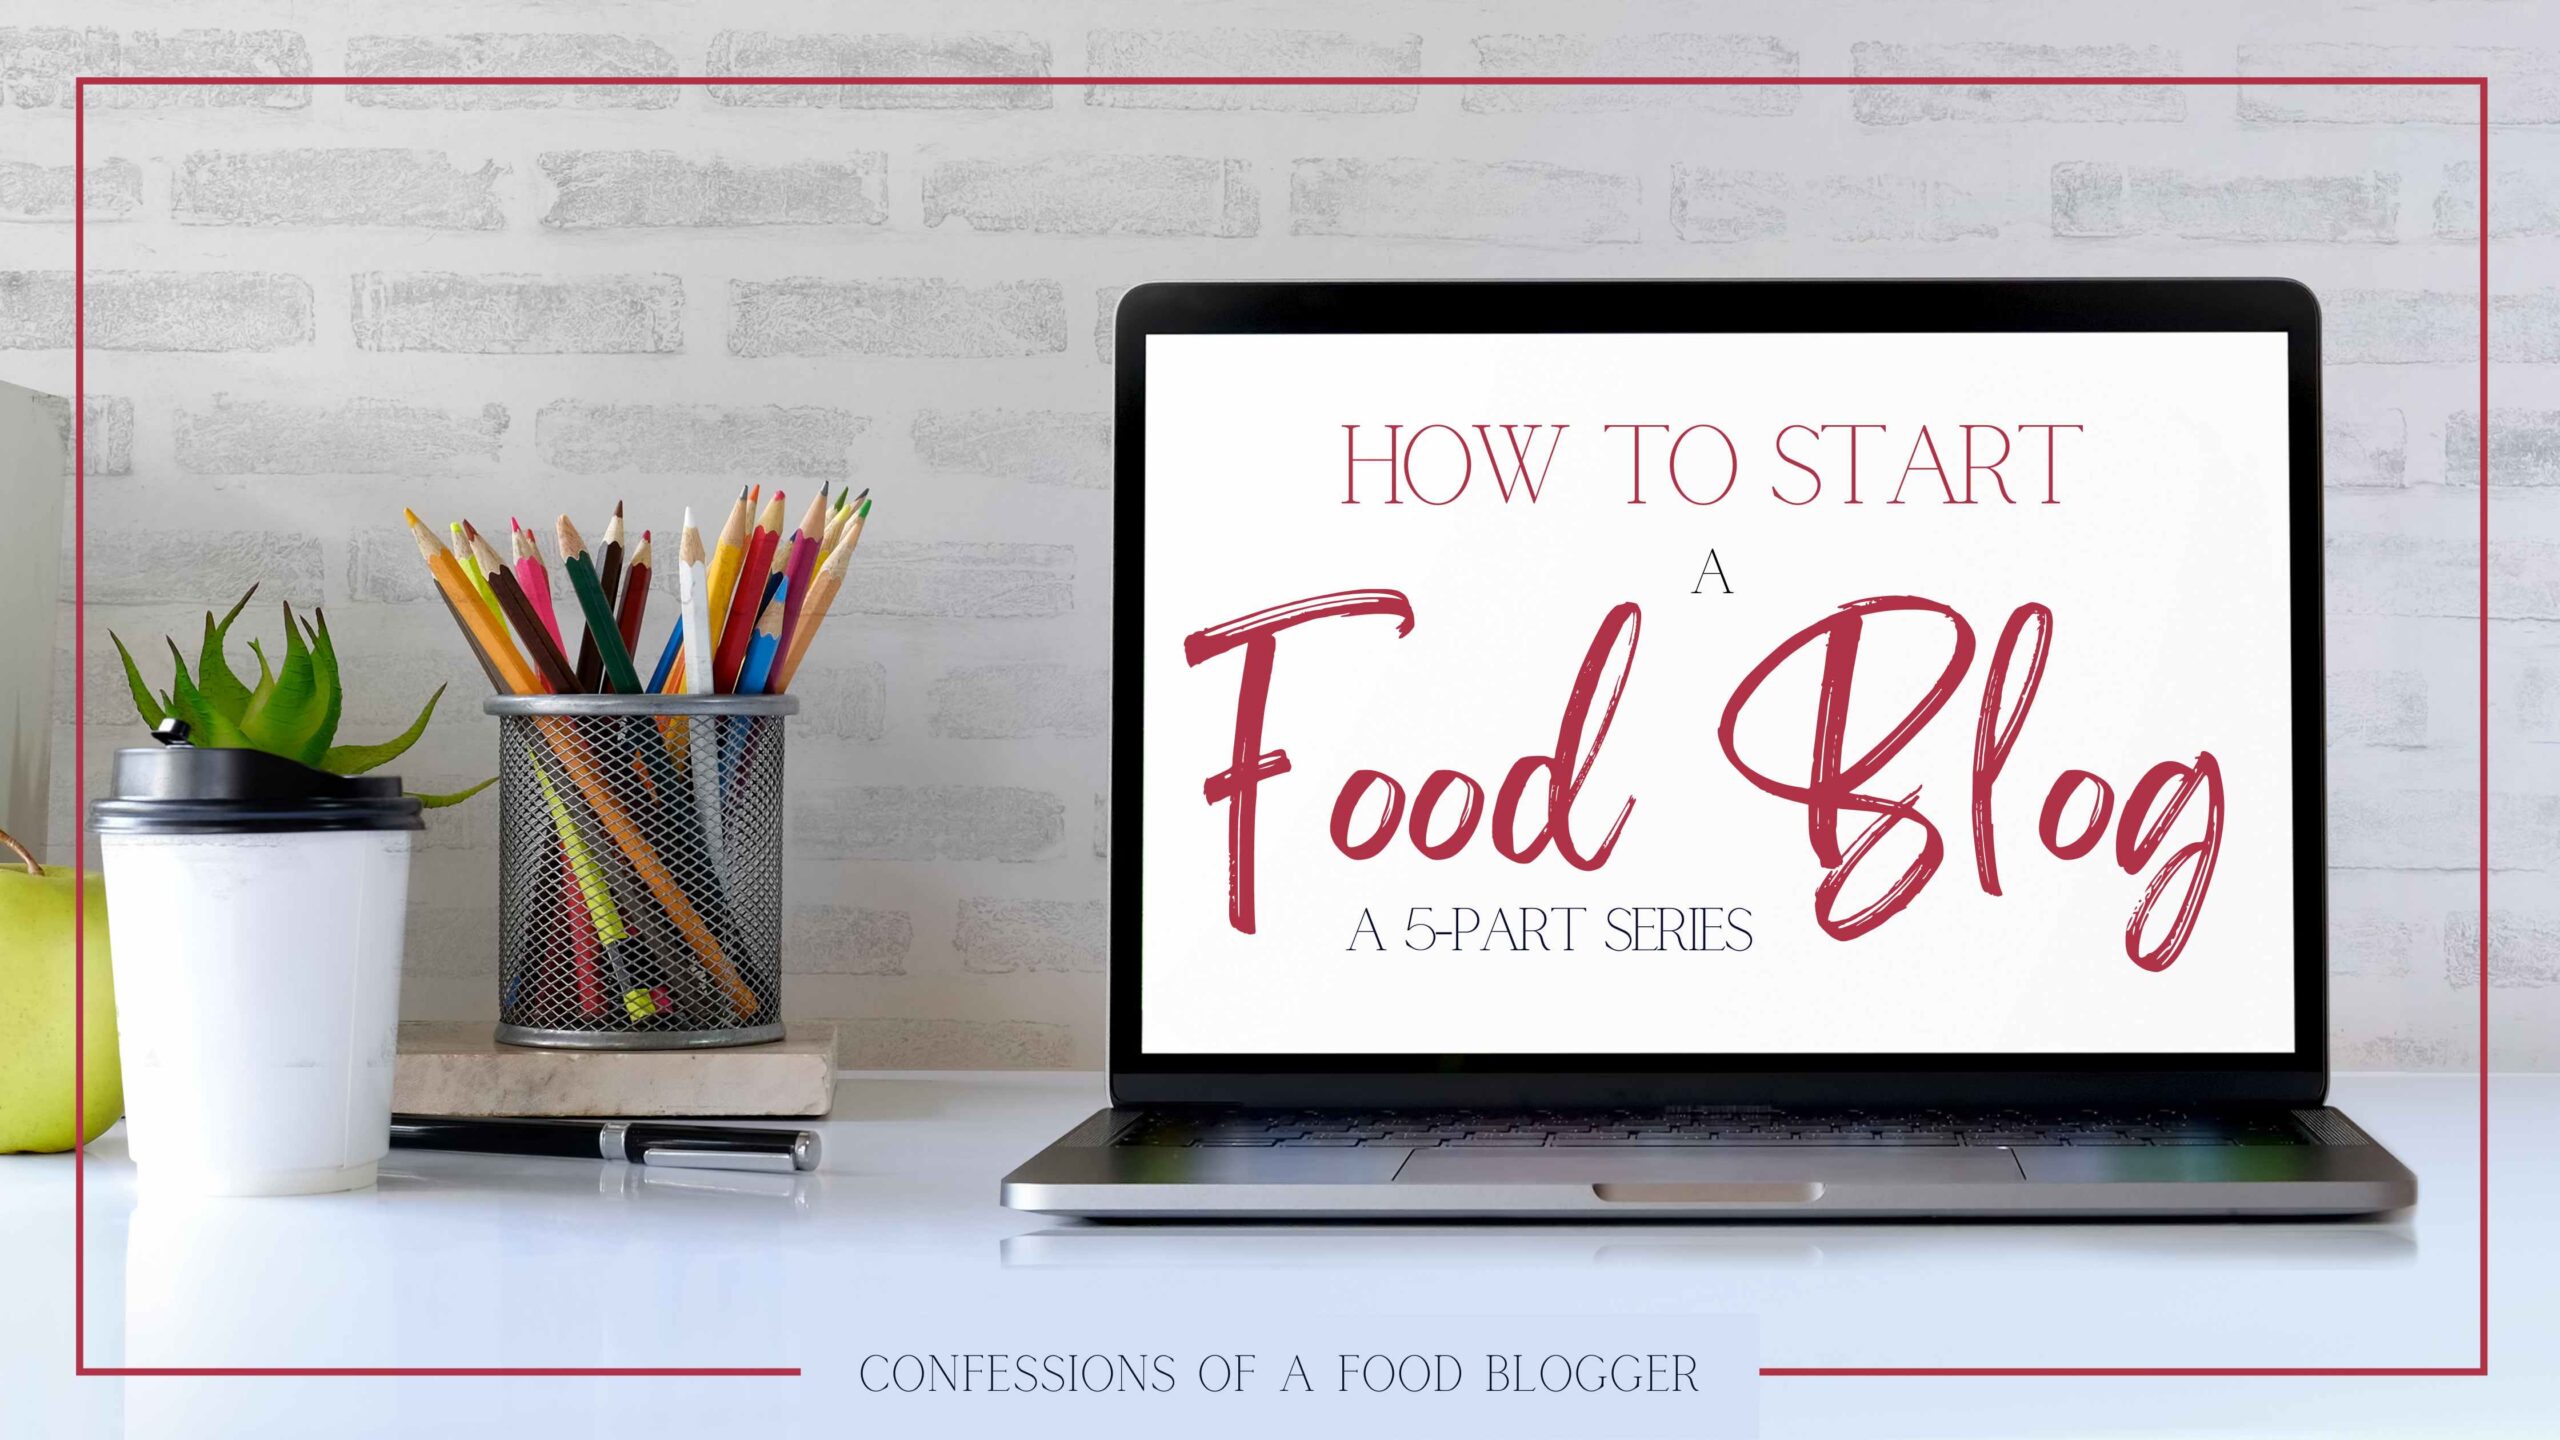 how to start a food blog text on a laptop screen